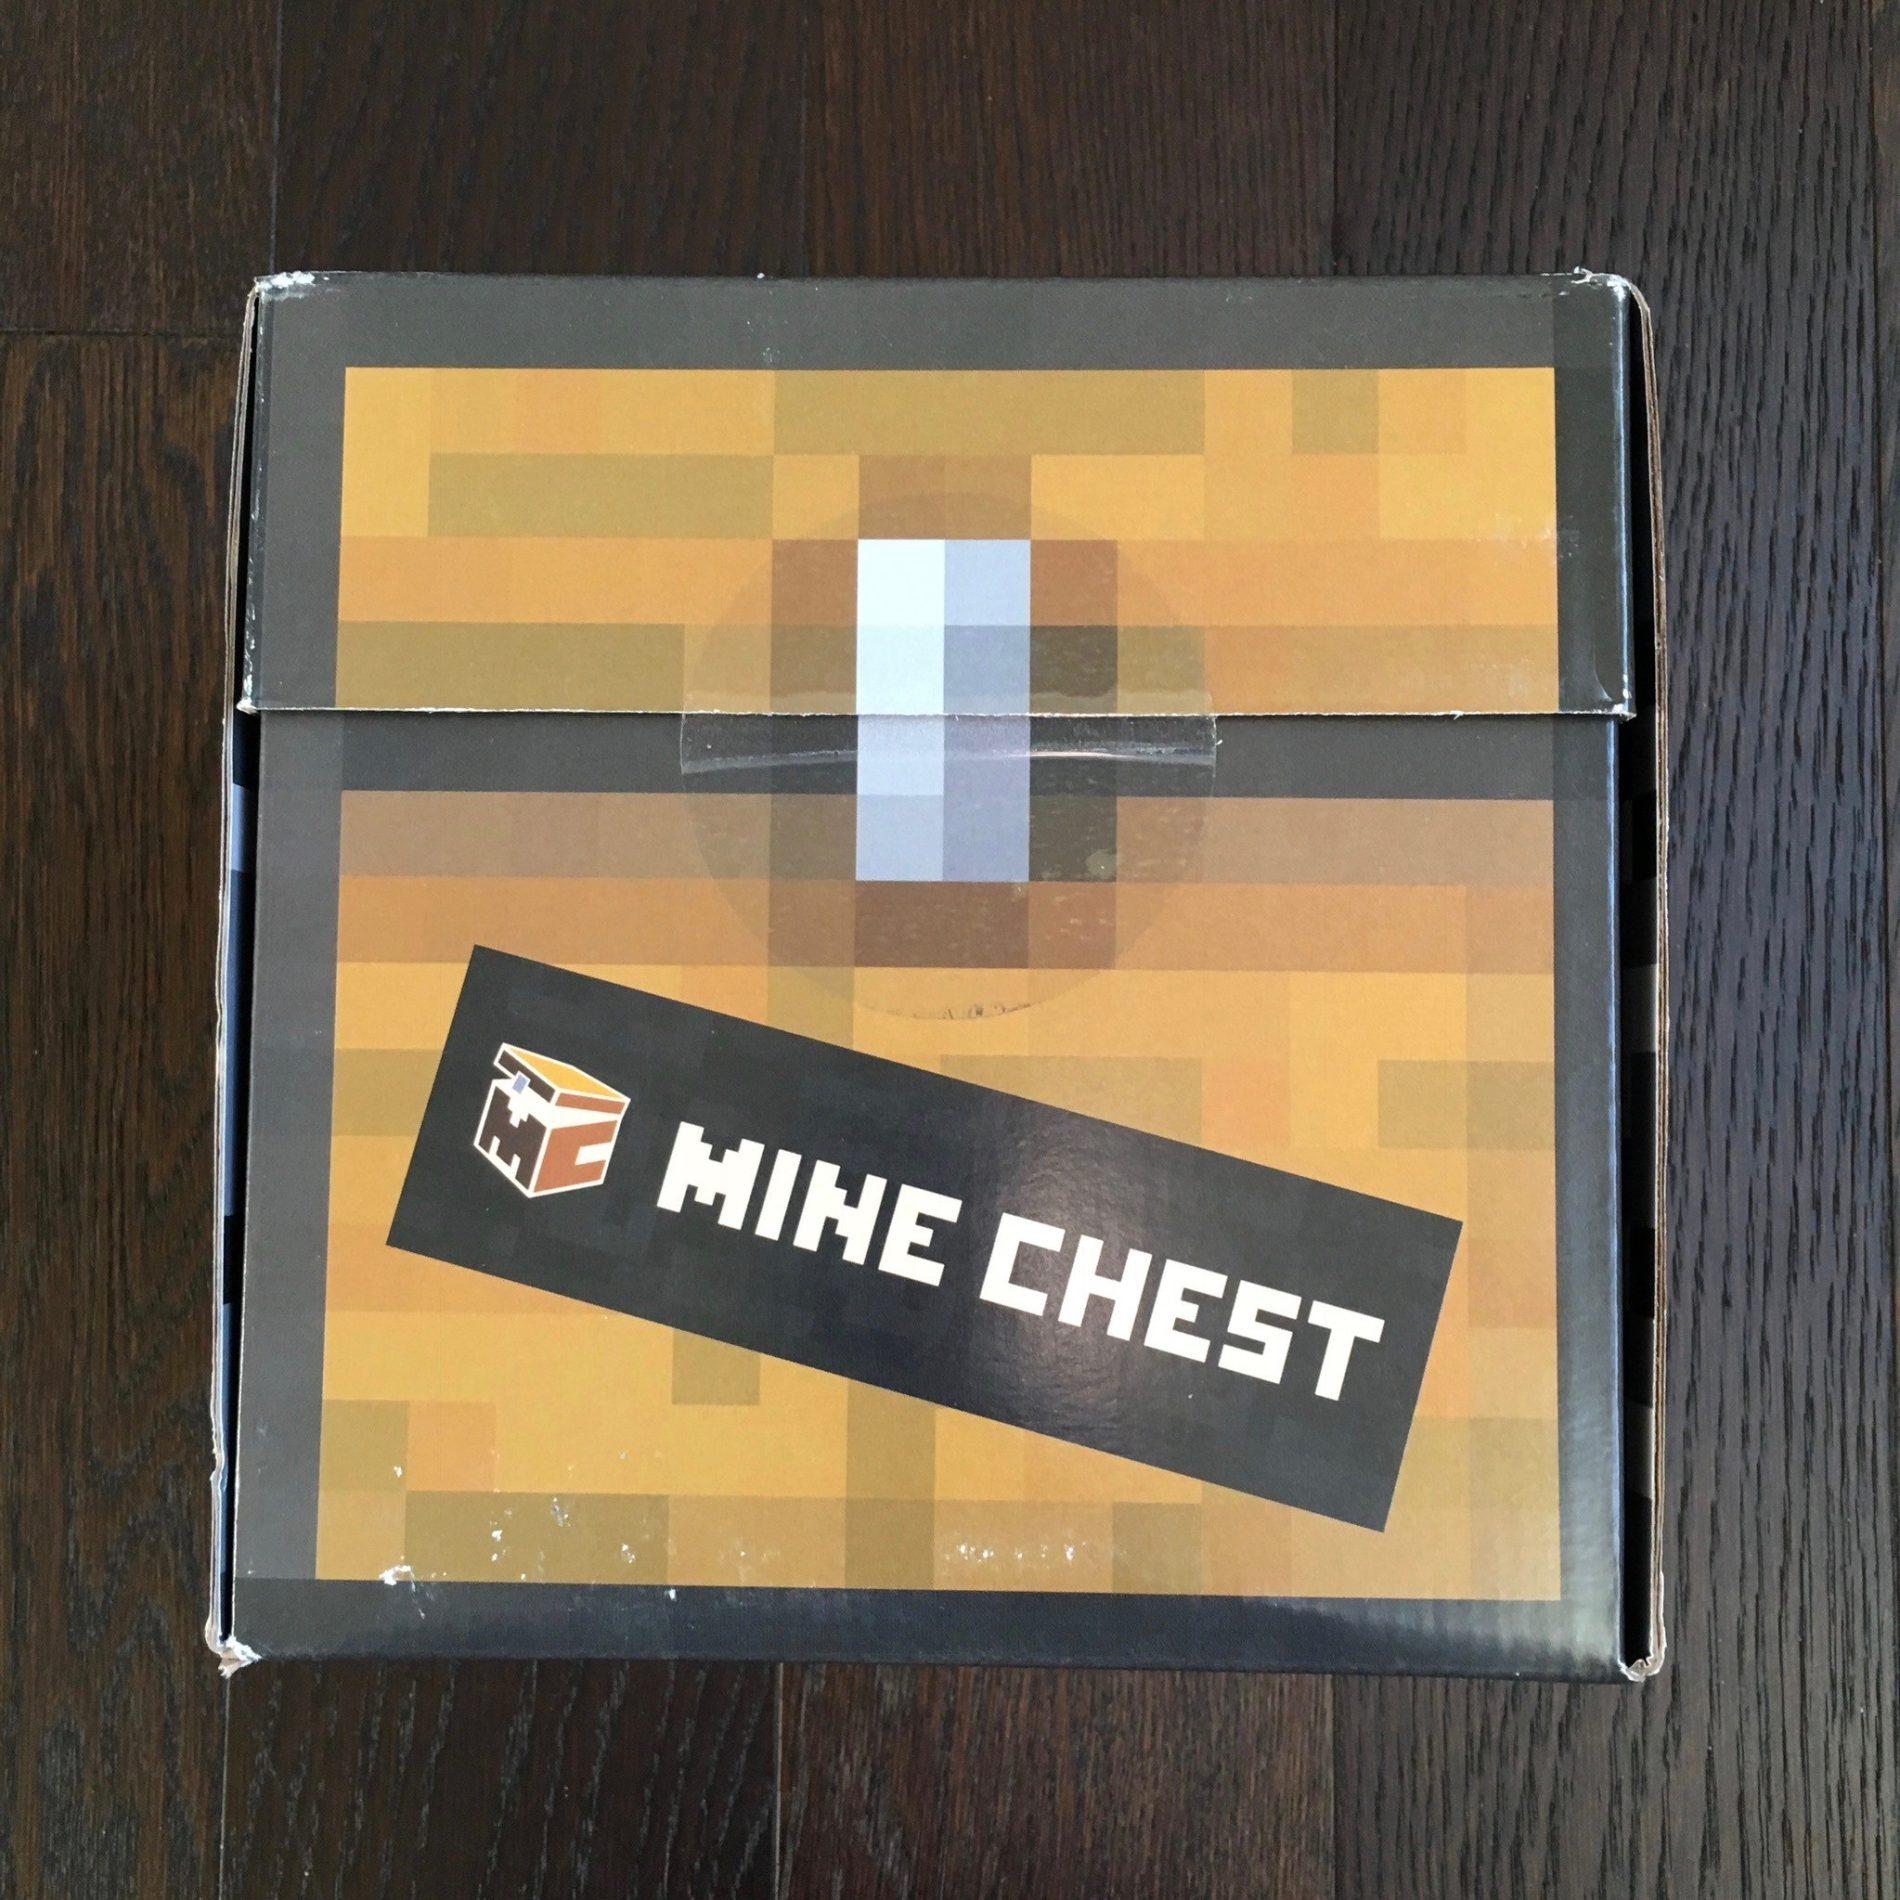 Mine Chest Review – January / February 2018